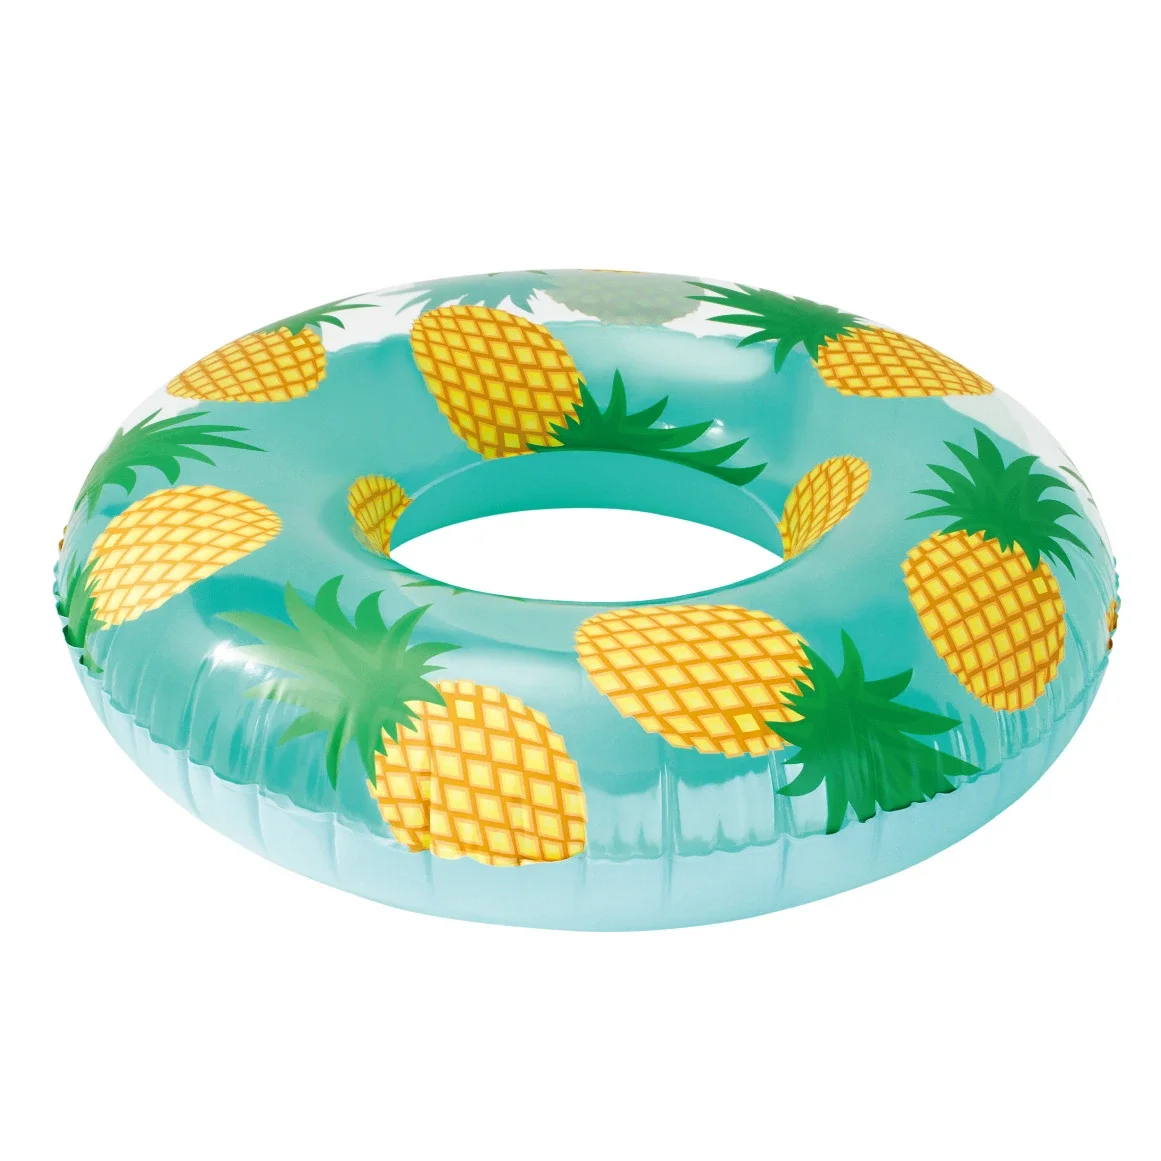 

New Design Pineapple Print Tube Swimming Ring Air Mattress Outdoor Summer Water Party Toys Inflatable Pool Float for kids adults, Green